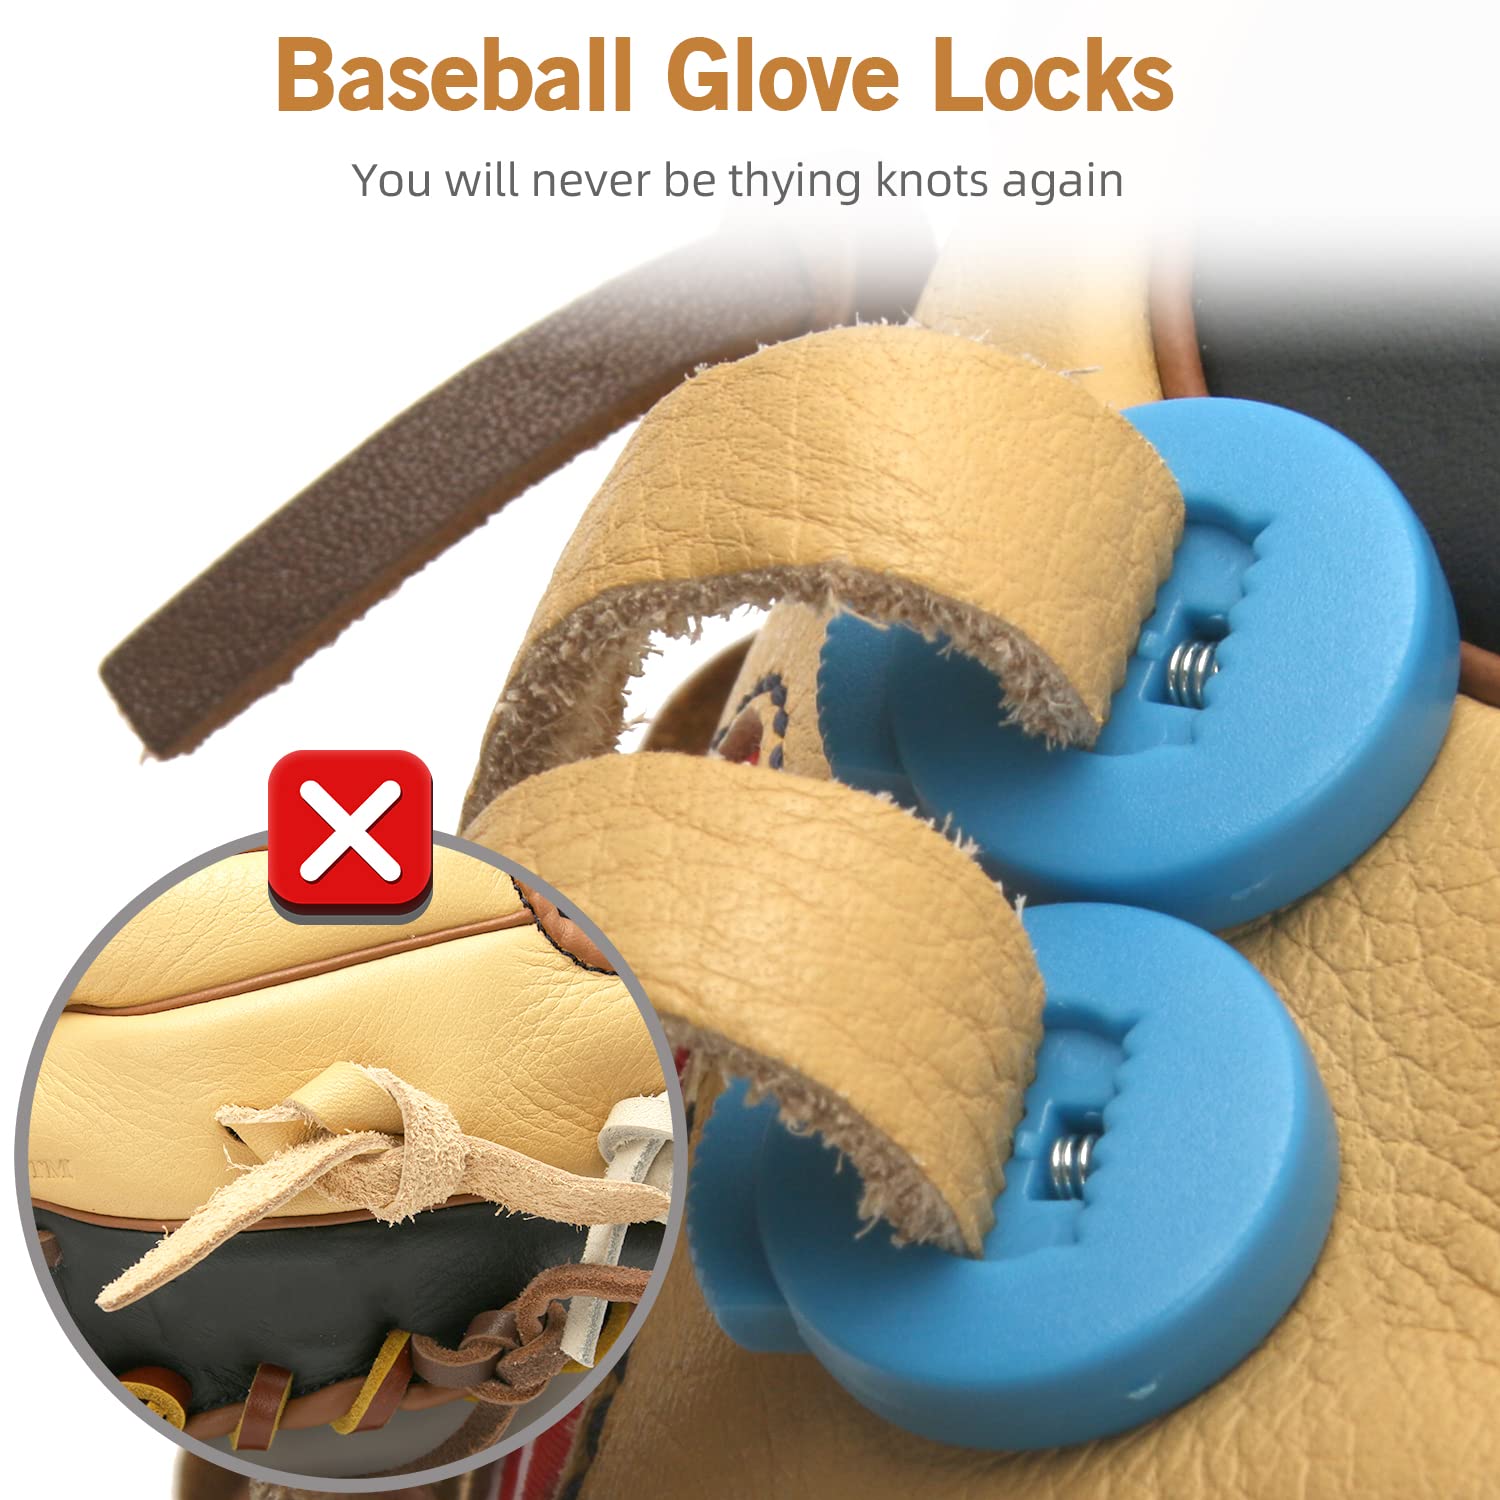 Glove Locks, Lace Locks for Baseball Glove 8 Pack, Never Need Thying Knots  Again, Strong Elasticity, Made Plastic and Springs, Fits All Gloves, Baseball  Glove Accessories 